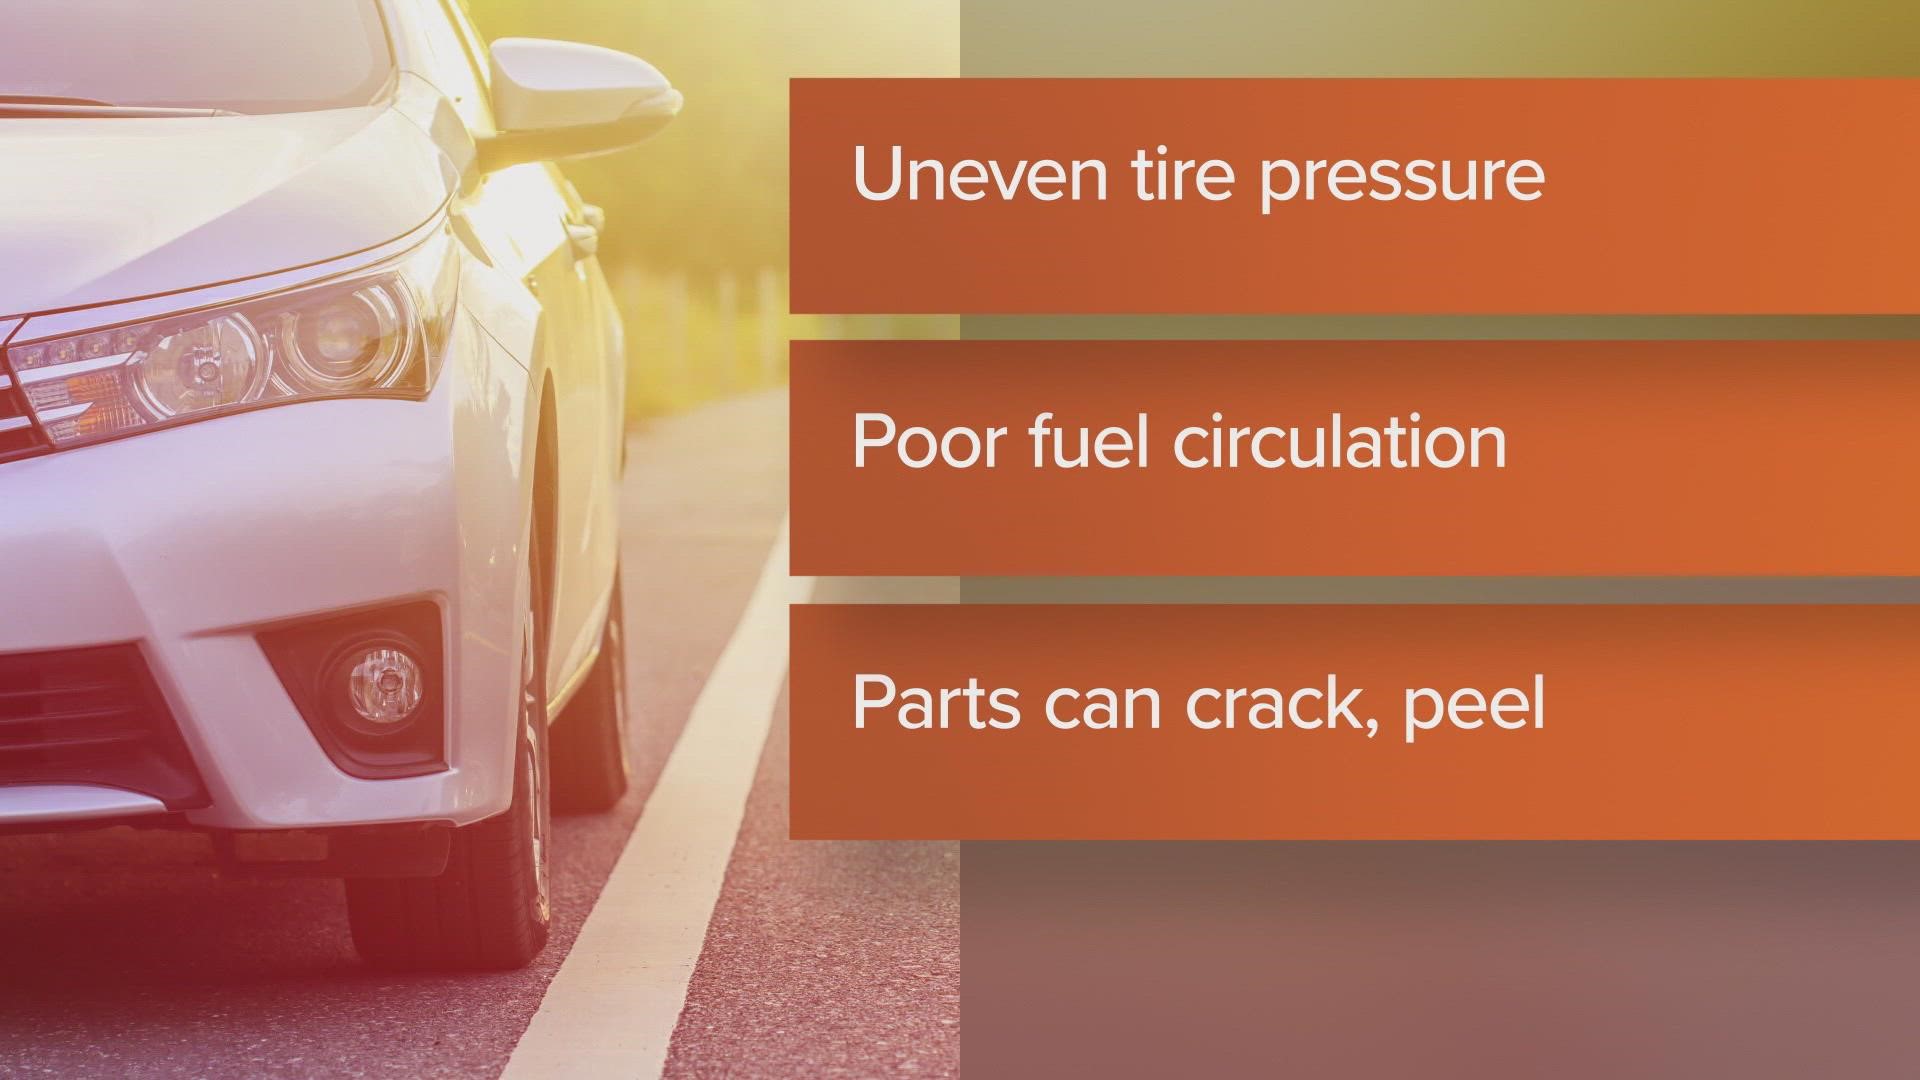 Extreme heat can cause a variety of issues on your vehicle. Here's how you can prevent those.